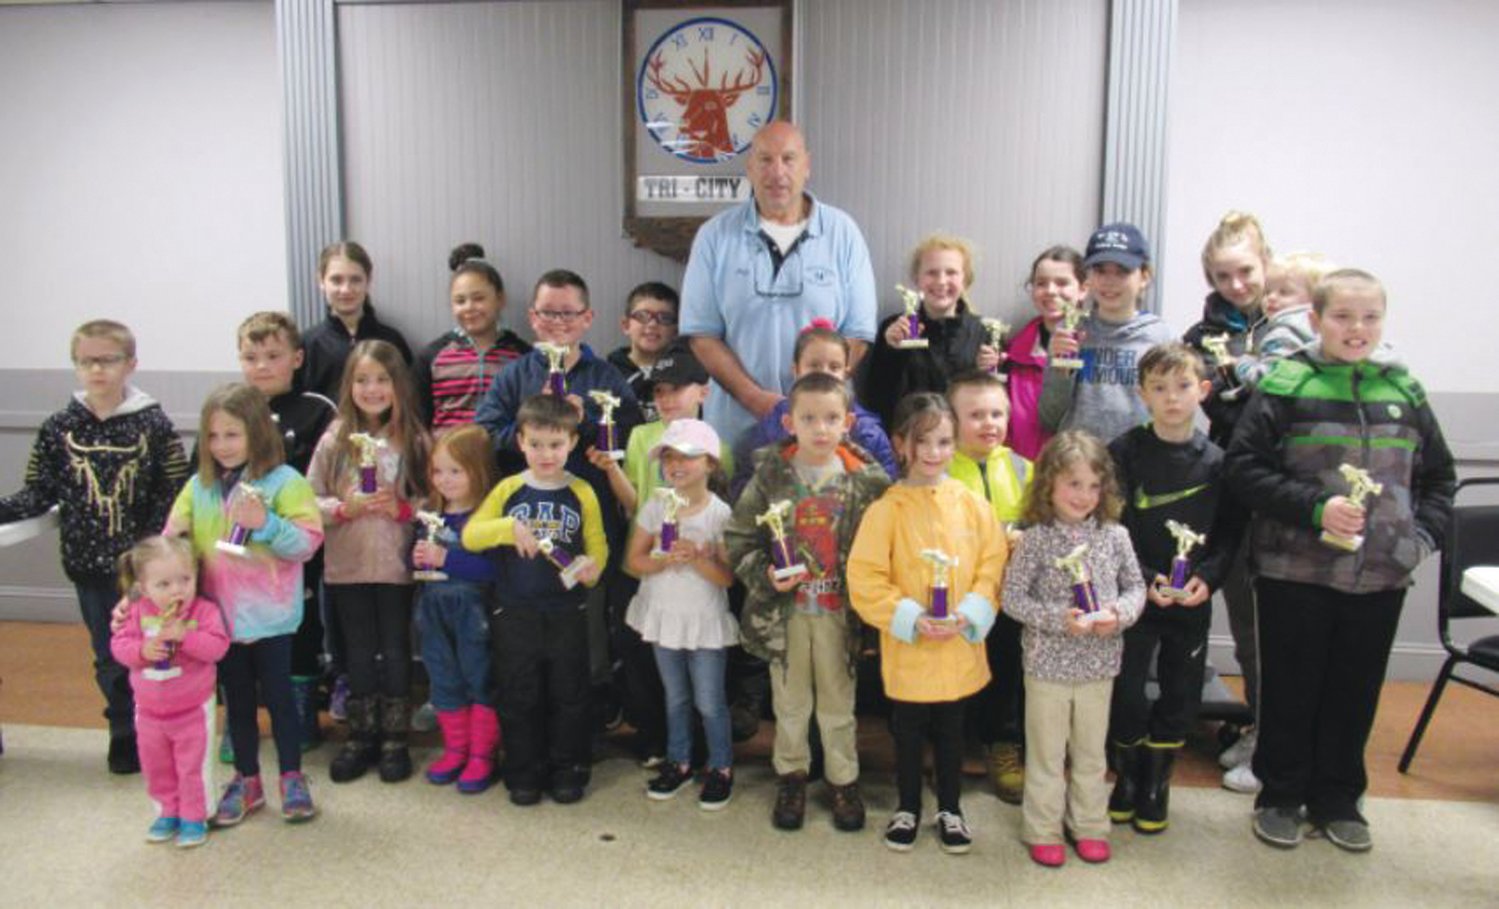 GRIFF’S GANG: Griff Williams (center back) is pictured with many of the children who cast their lines into Golden Pond during the Tri-City Elks 11th Annual Kids Trout Derby in 2019. (Sun Rise photos by Pete Fontaine)